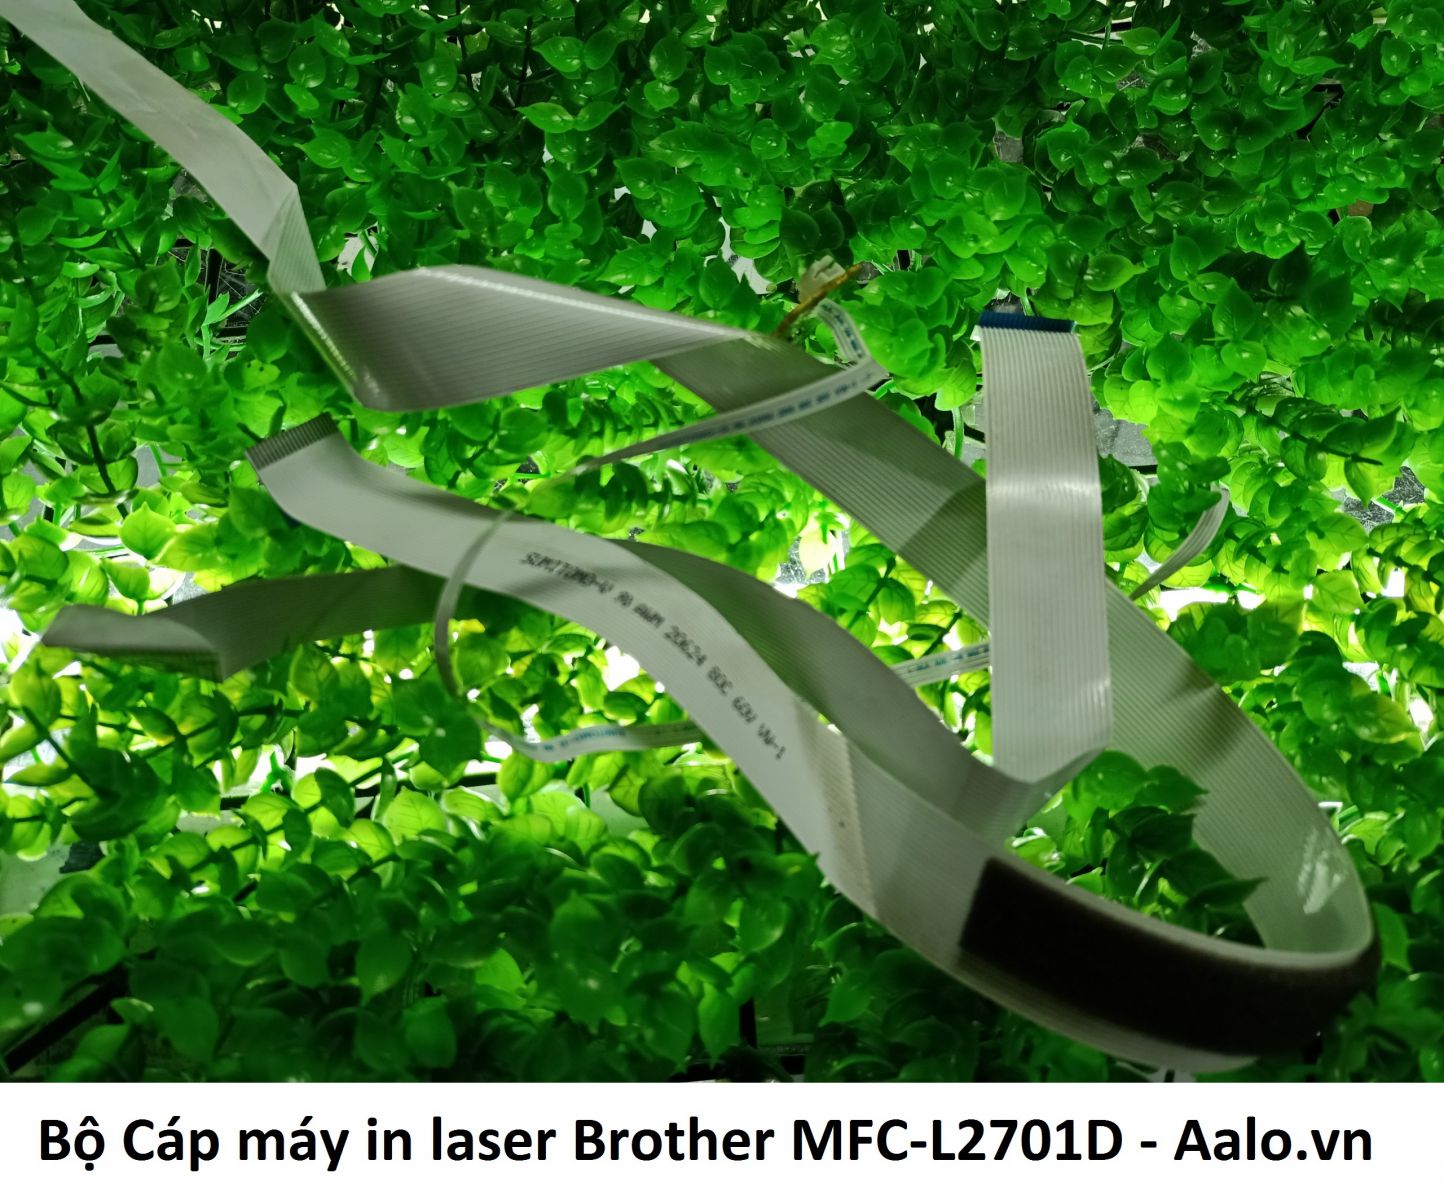 Bộ Cáp máy in laser Brother MFC-L2701D - Aalo.vn